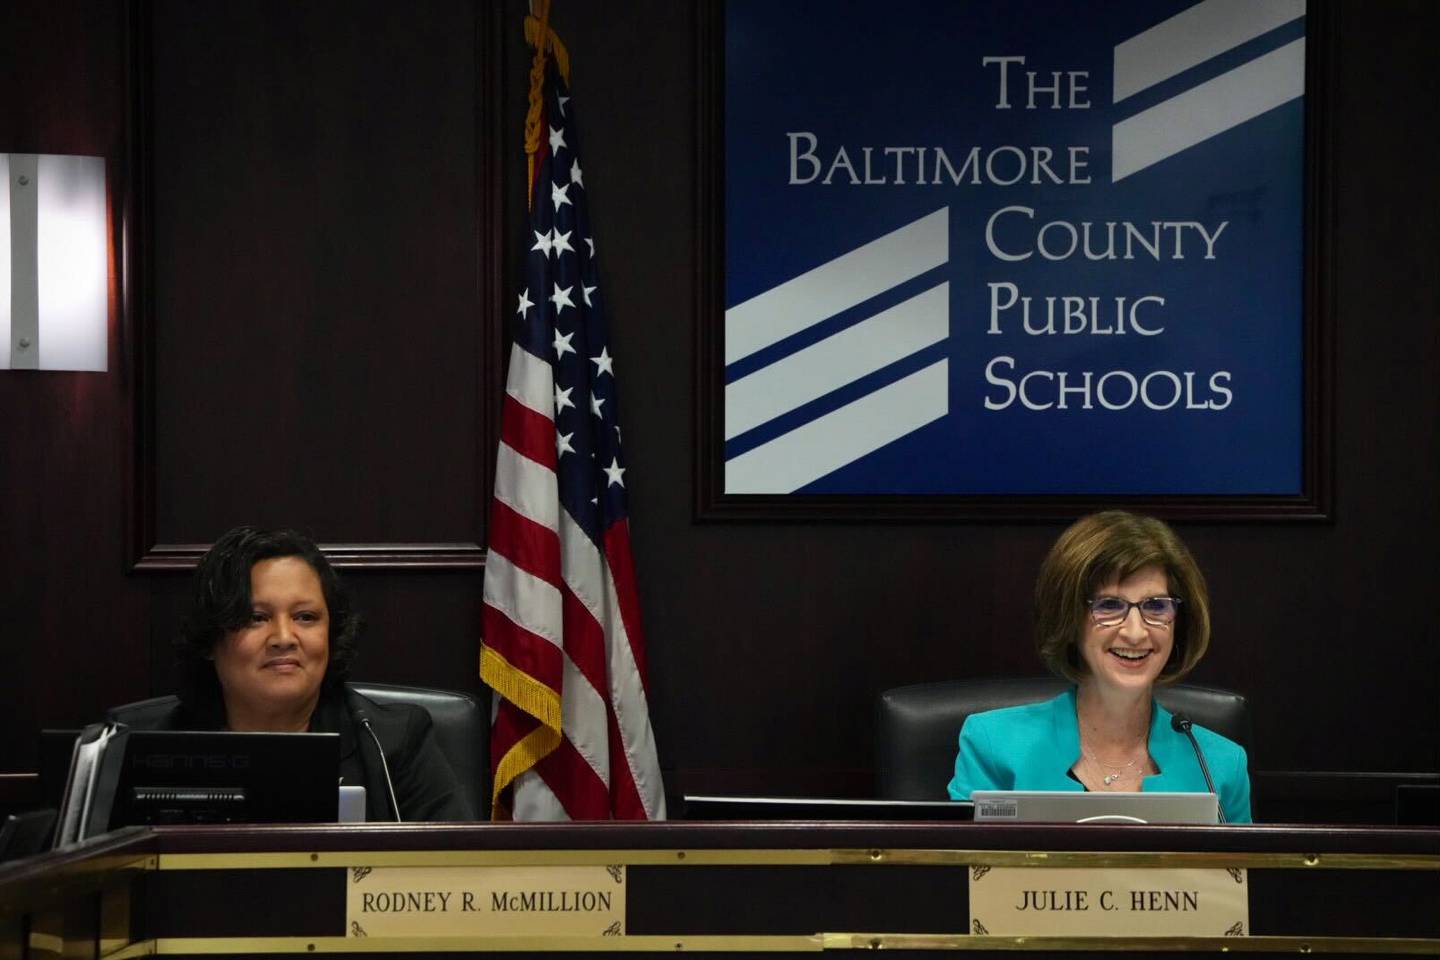 Jane Lichter, right, was elected chair of the Baltimore County Public School Board, and Robin Harvey, left, was elected vice chair at the school board’s meeting on Tuesday, December 6, 2022. They took their seats though the name tags hadn't been changed yet.